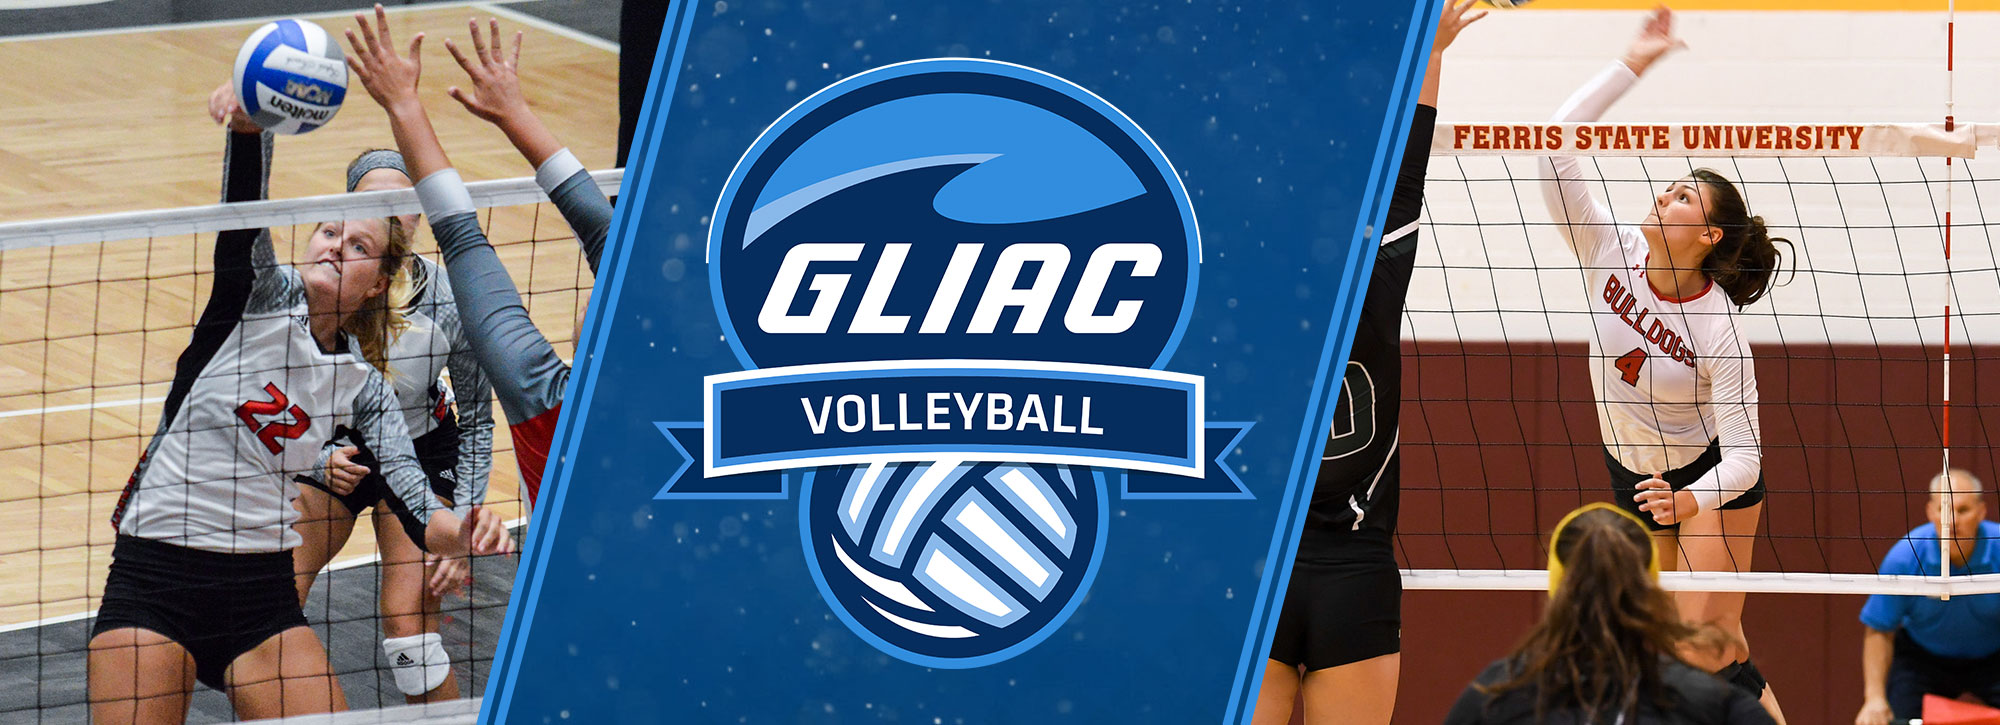 Ferris State's Cappel, Davenport's VanderHorst Honored GLIAC Volleyball Players of the Week